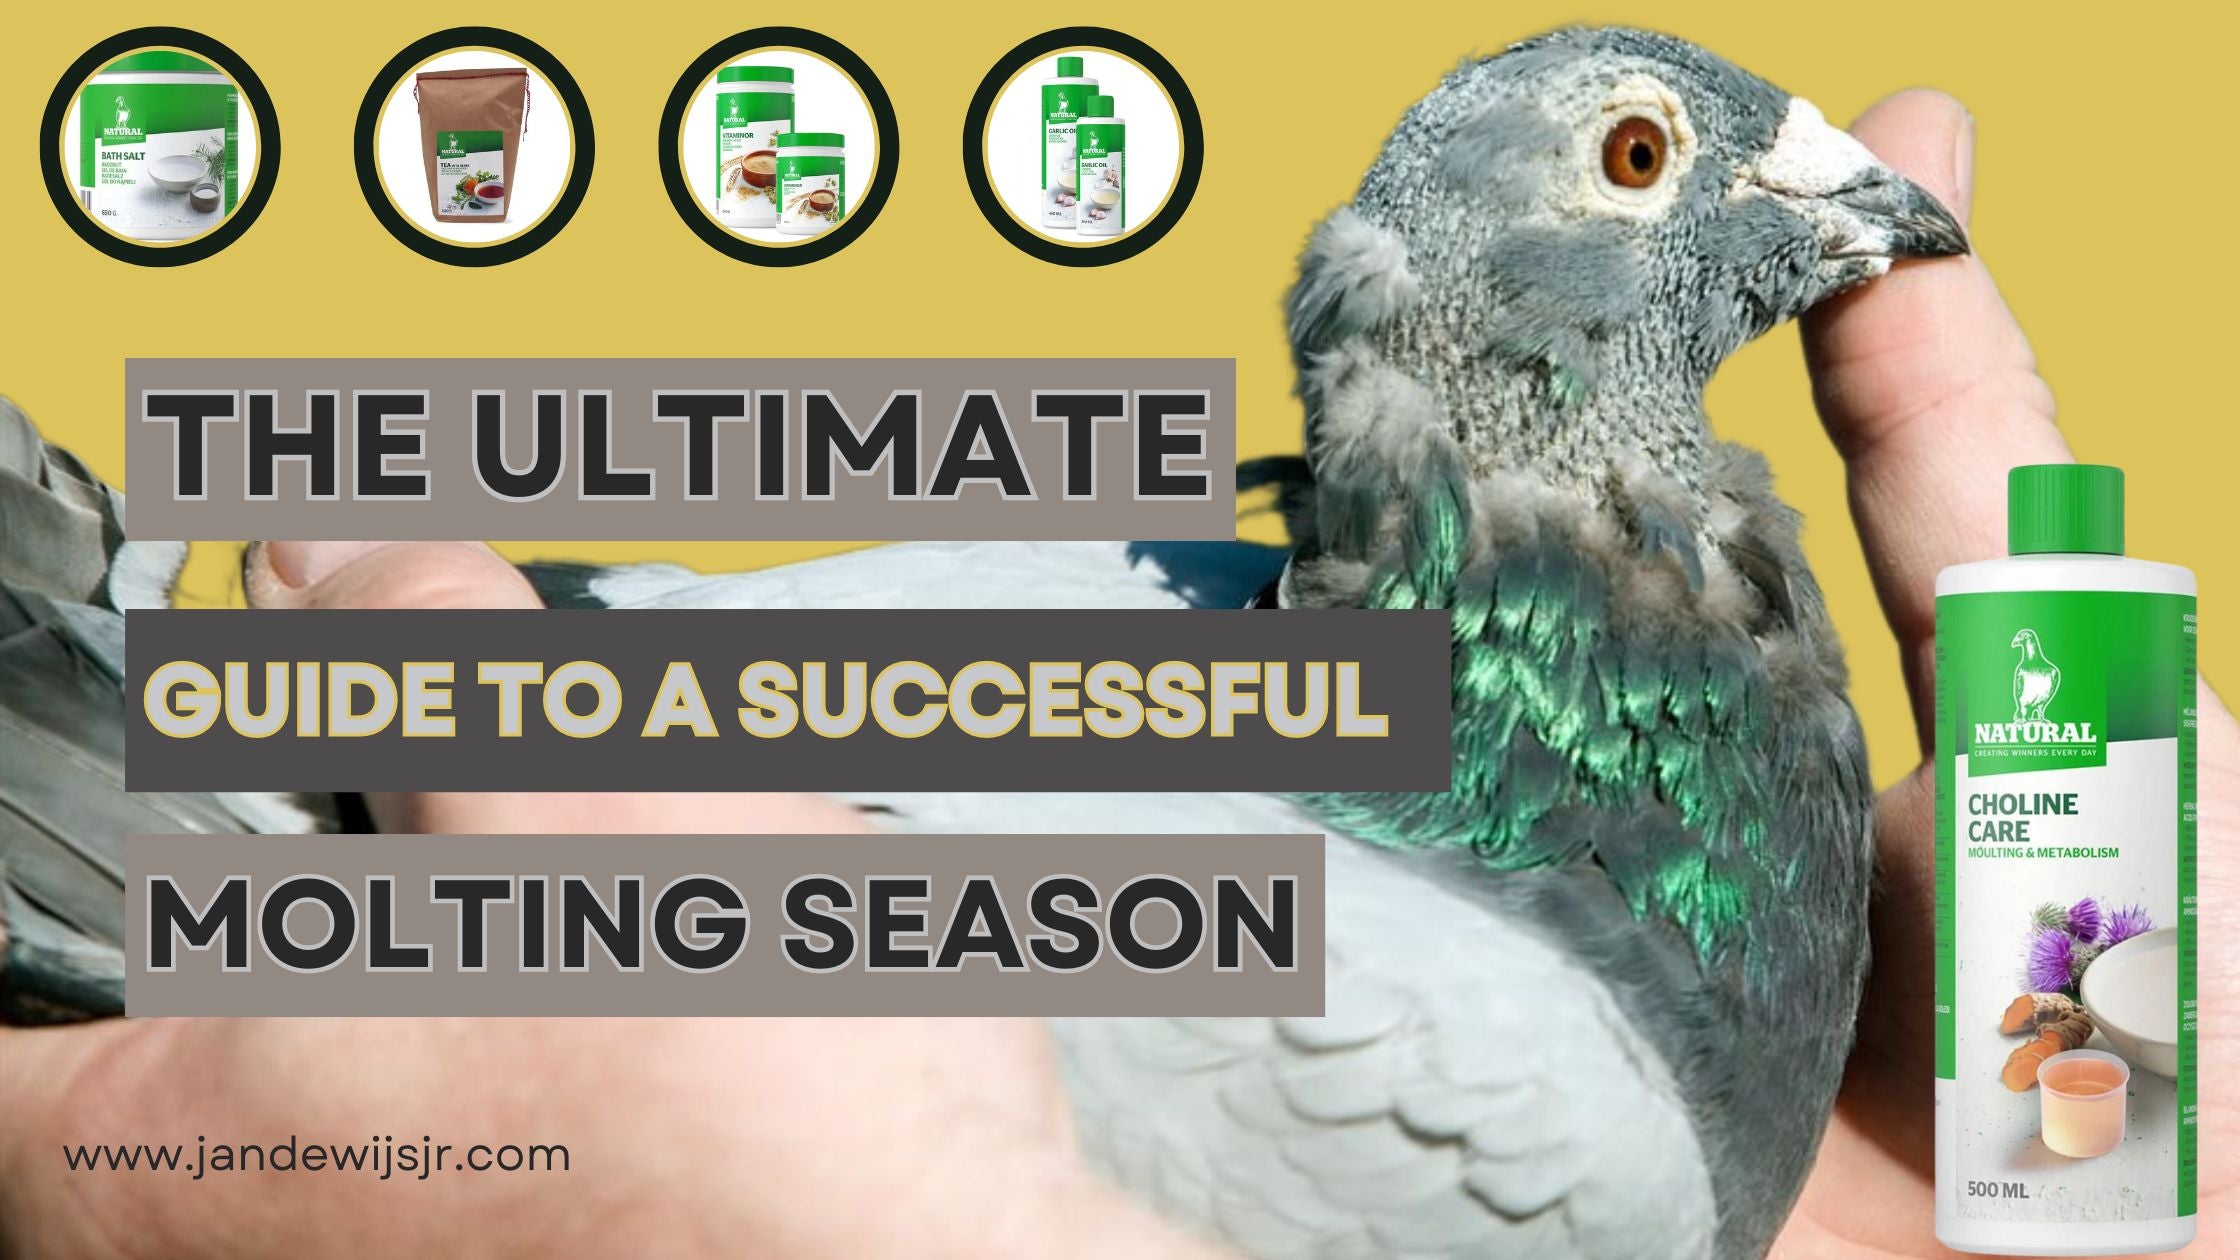 The Ultimate Guide to a Successful Molting Season